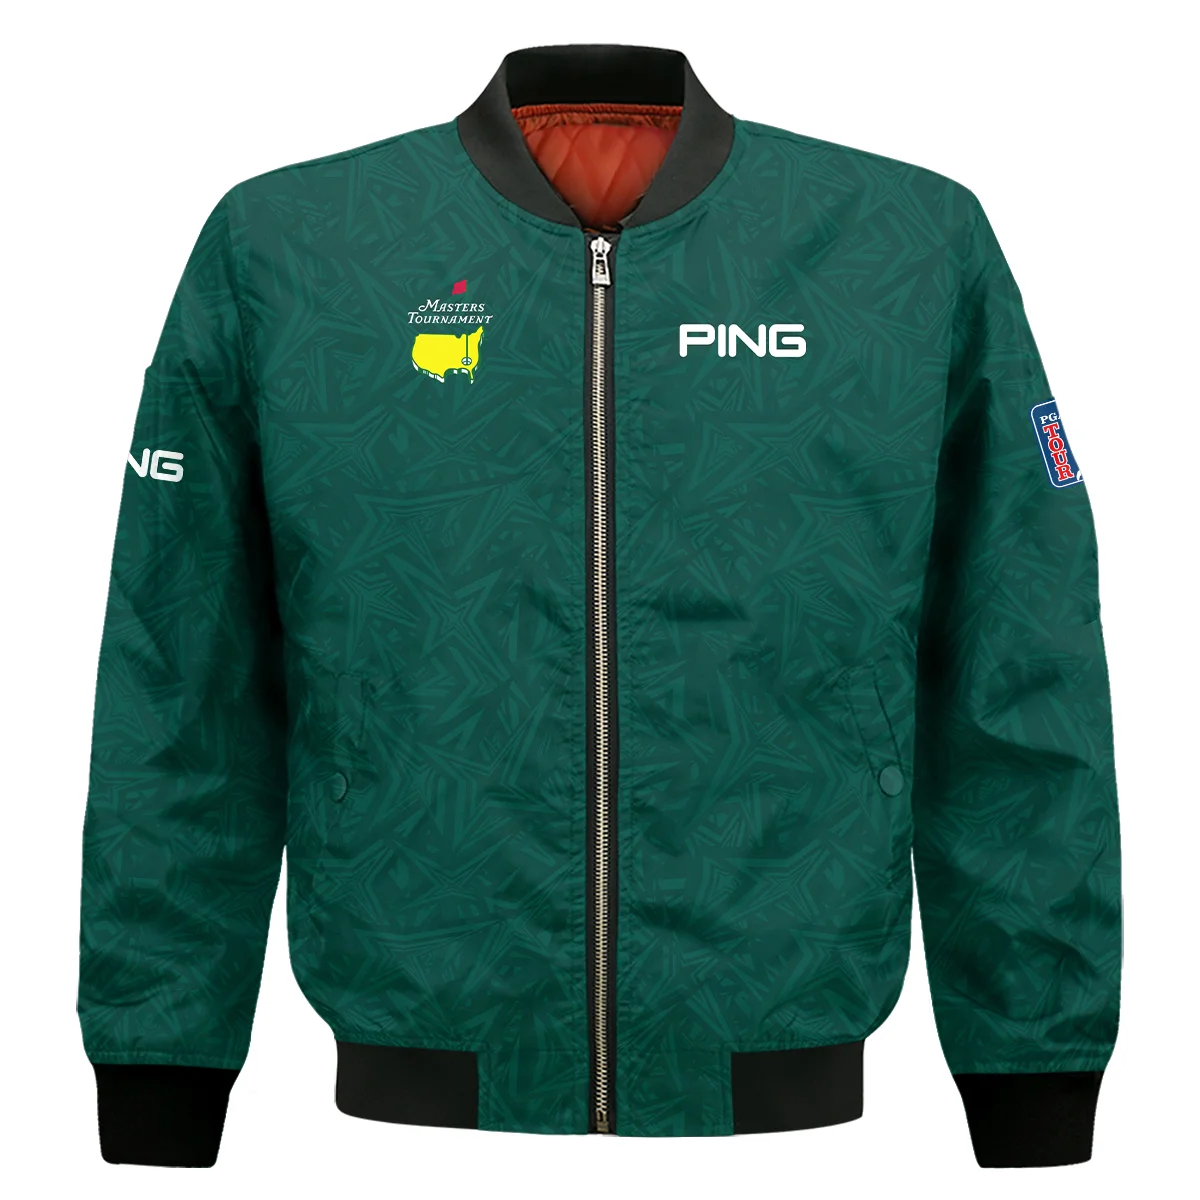 Stars Dark Green Abstract Sport Masters Tournament Ping Bomber Jacket Style Classic Bomber Jacket